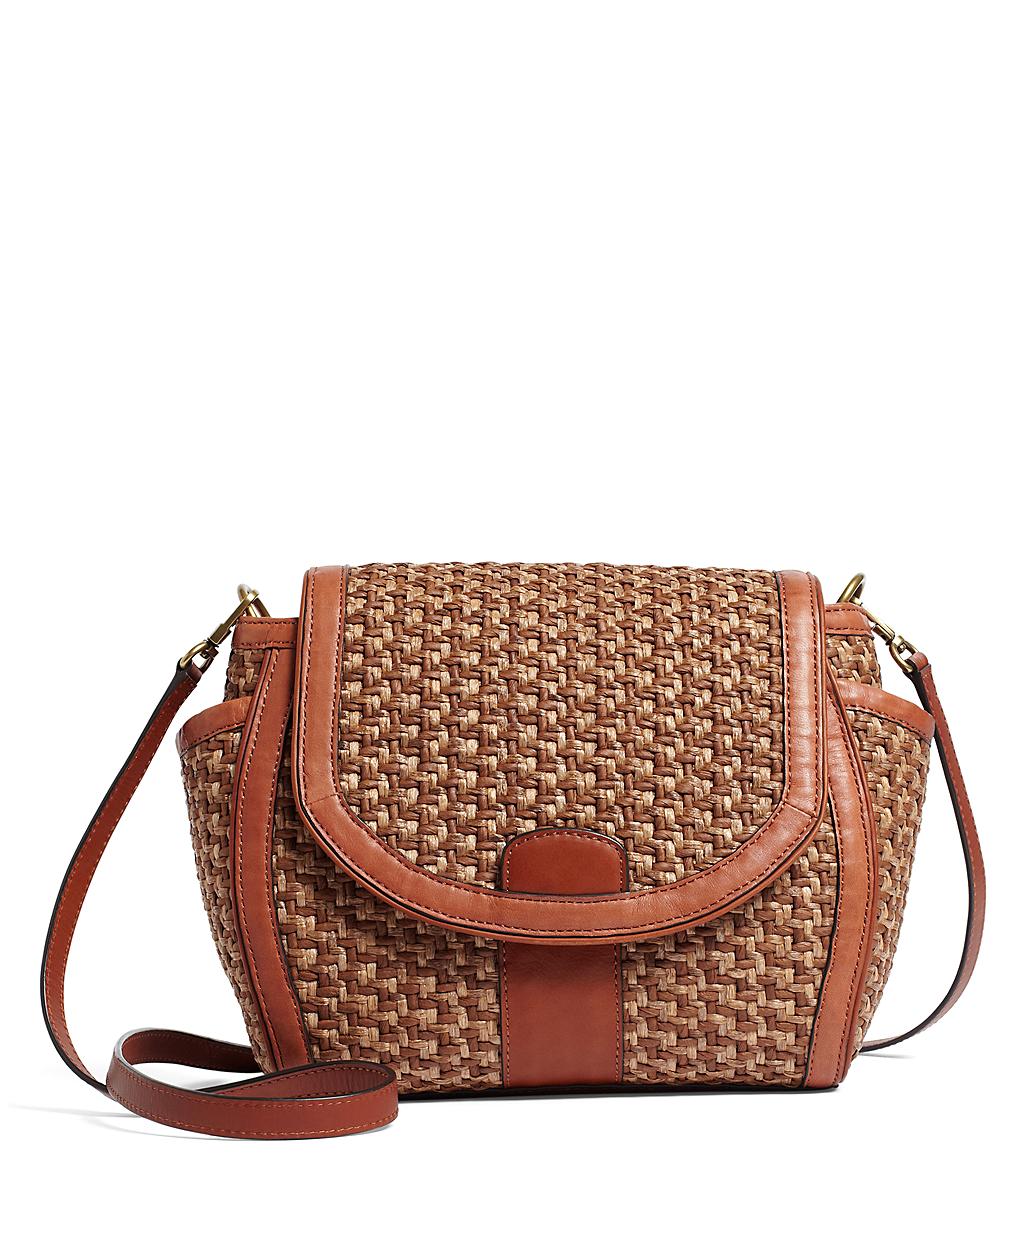 Brooks Brothers Natural Straw Crossbody Bag in Brown-Tobacco (Brown) - Lyst